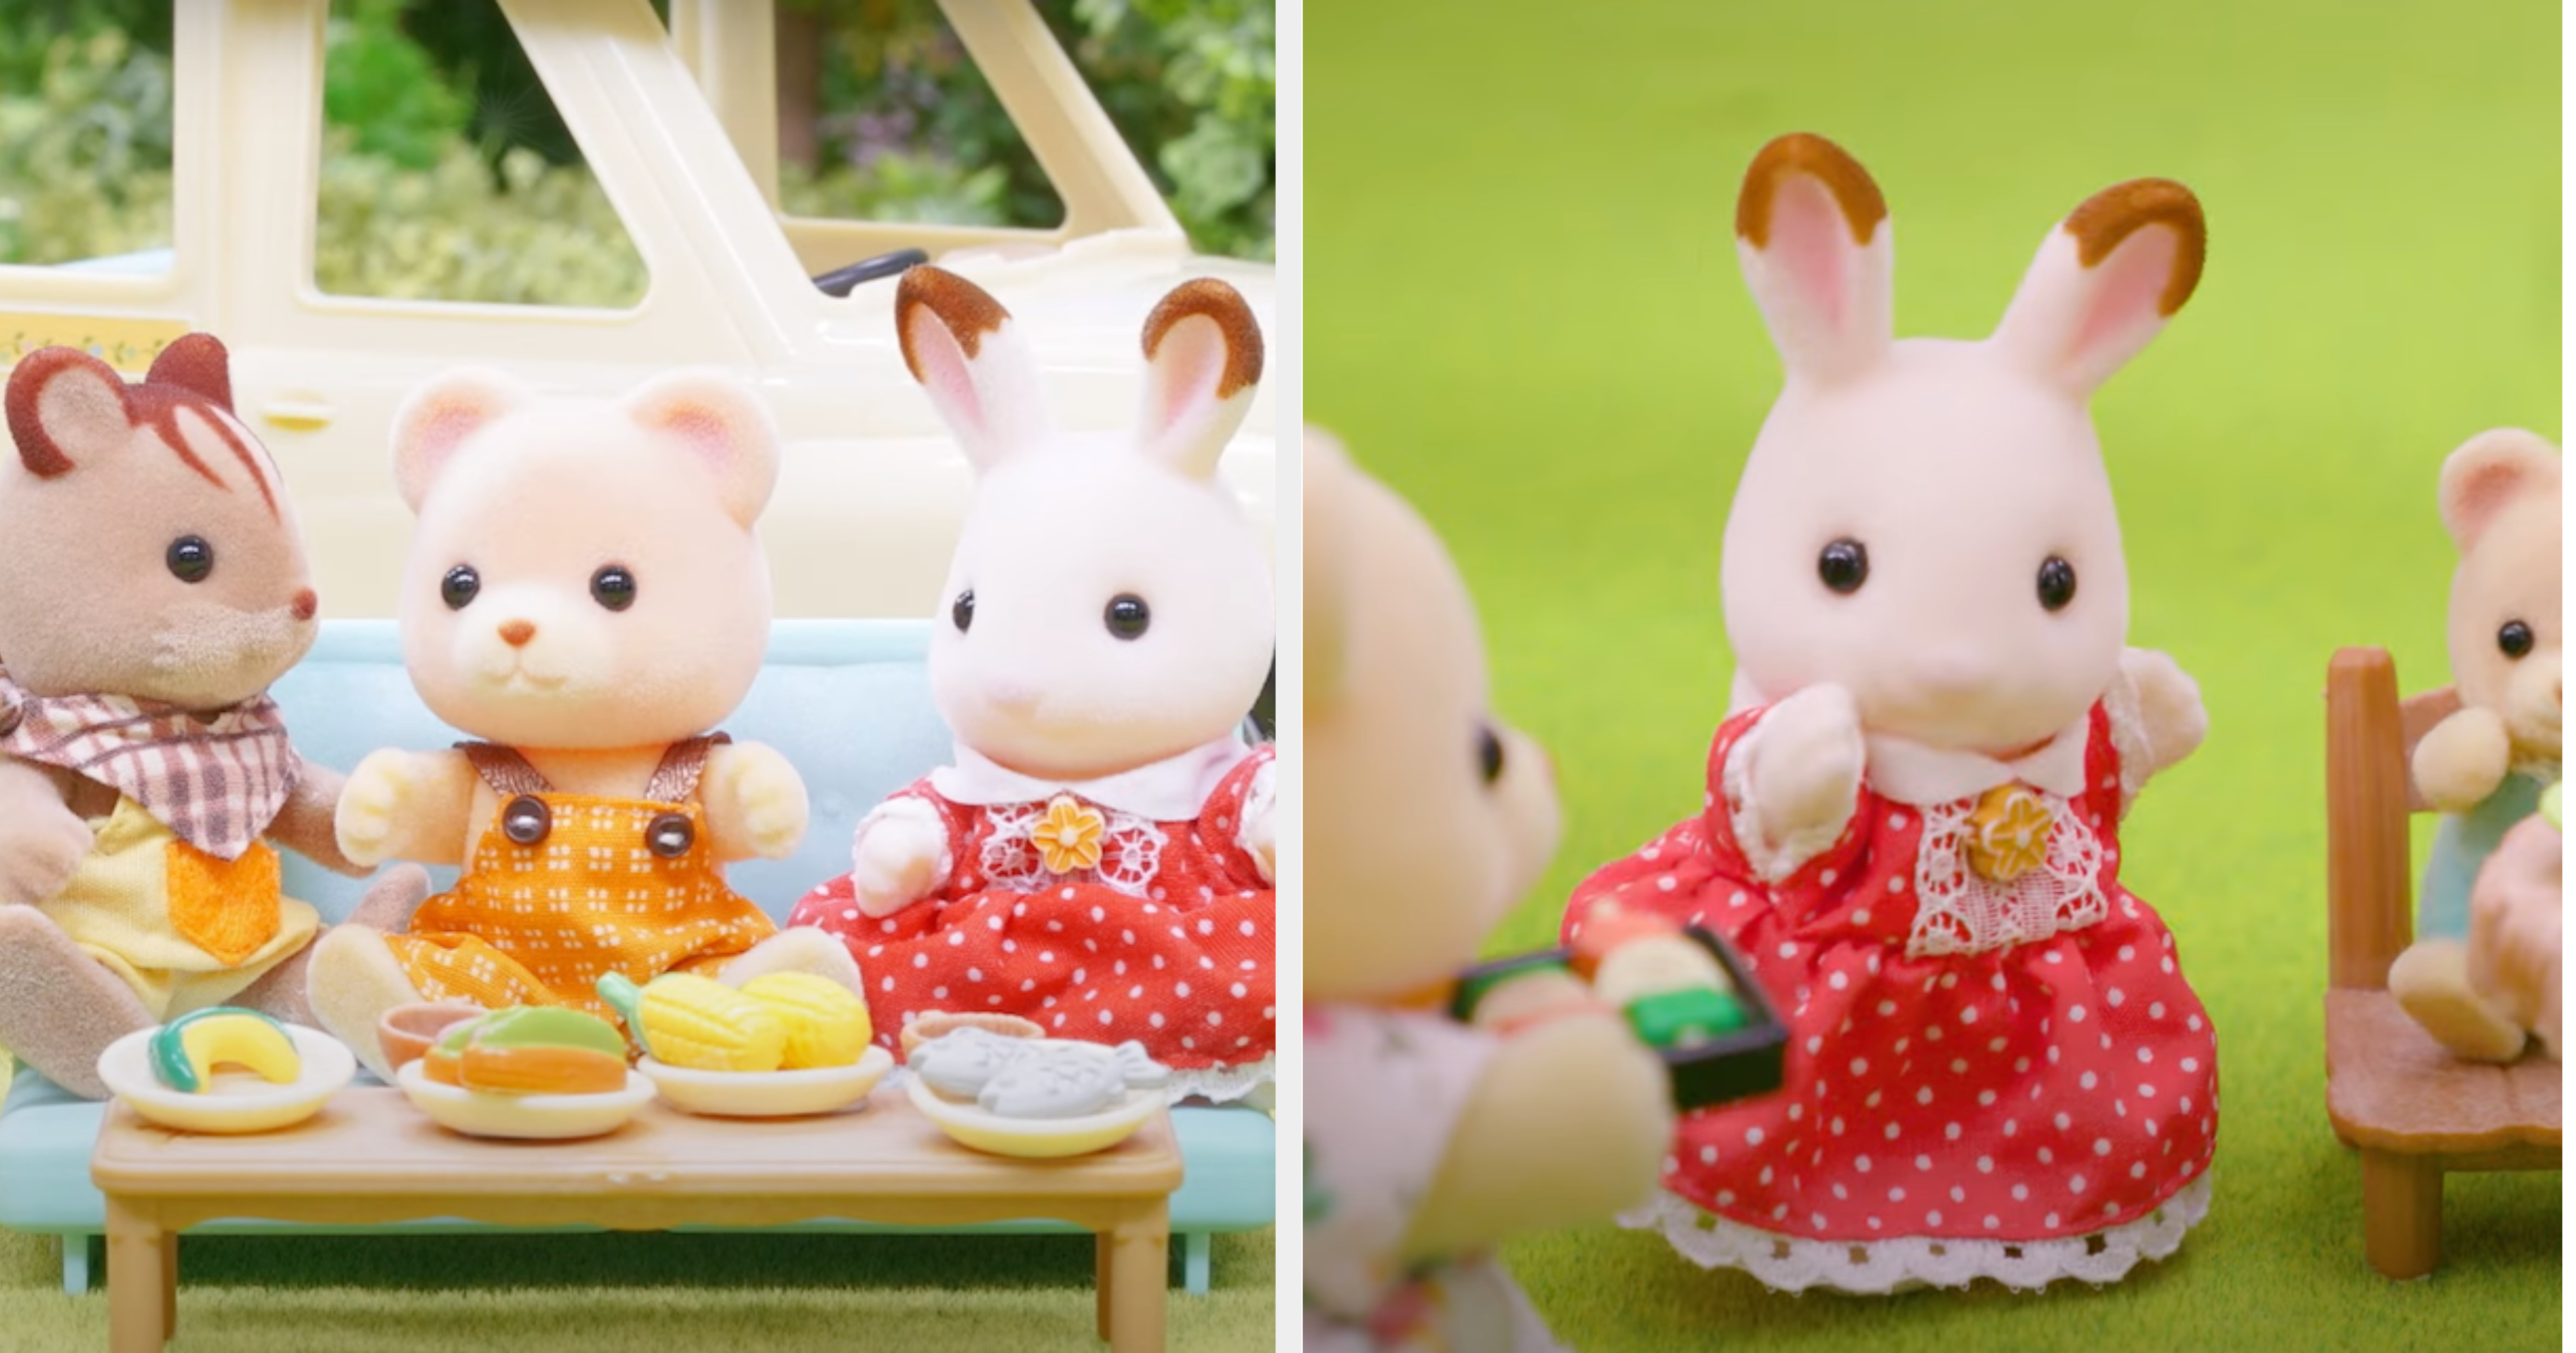 Creative Play With Sylvanian Families Playsets - Sticky Mud